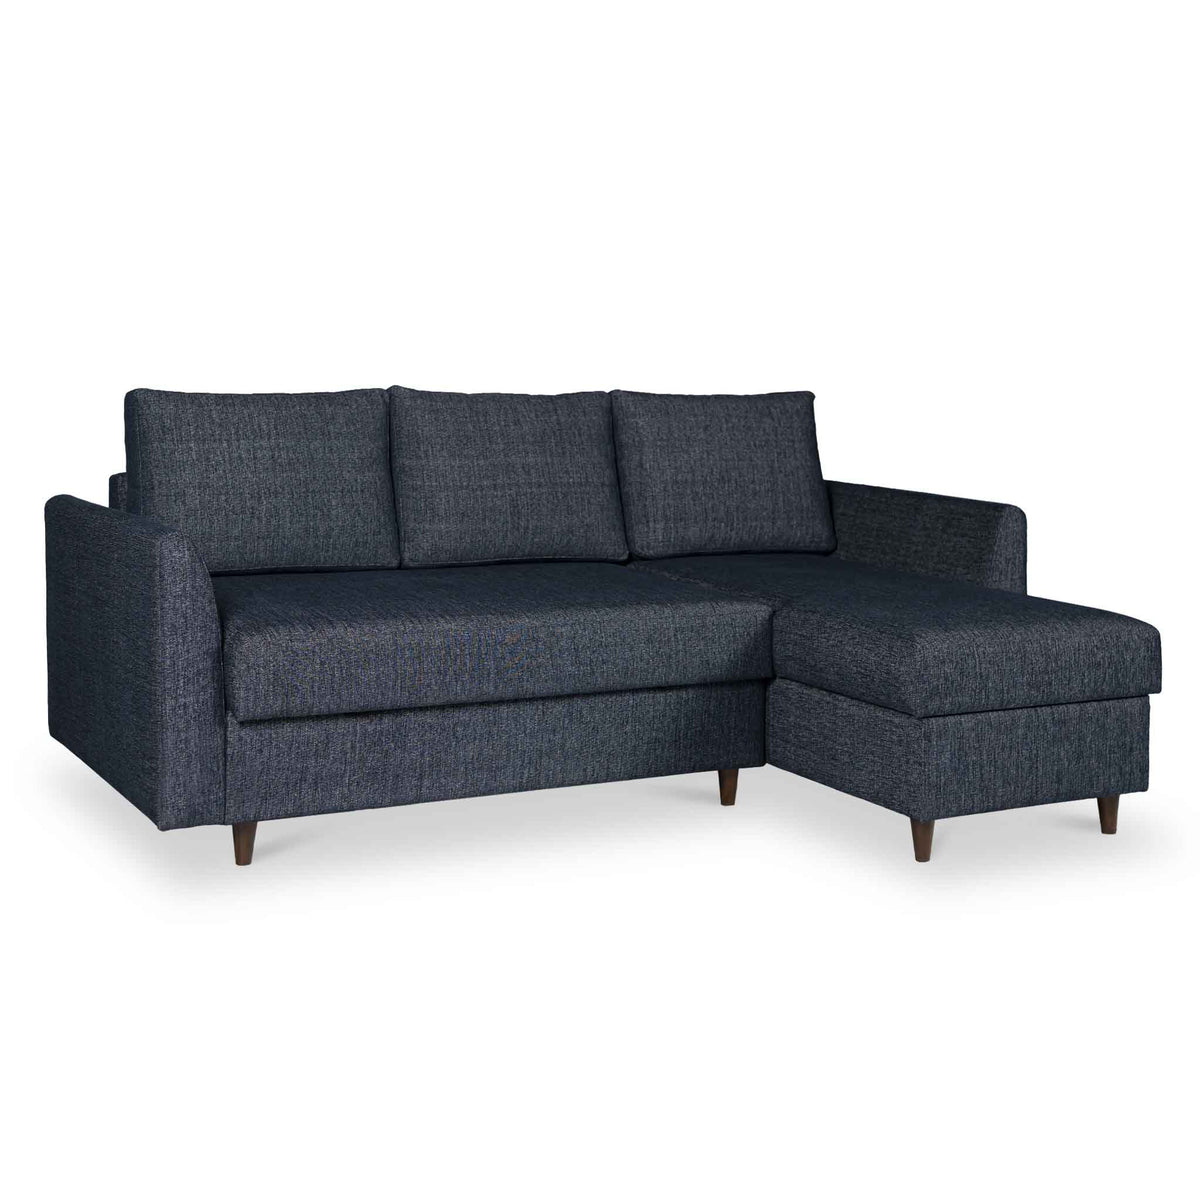 Millen Navy Blue Chaise Sofa Bed from Roseland